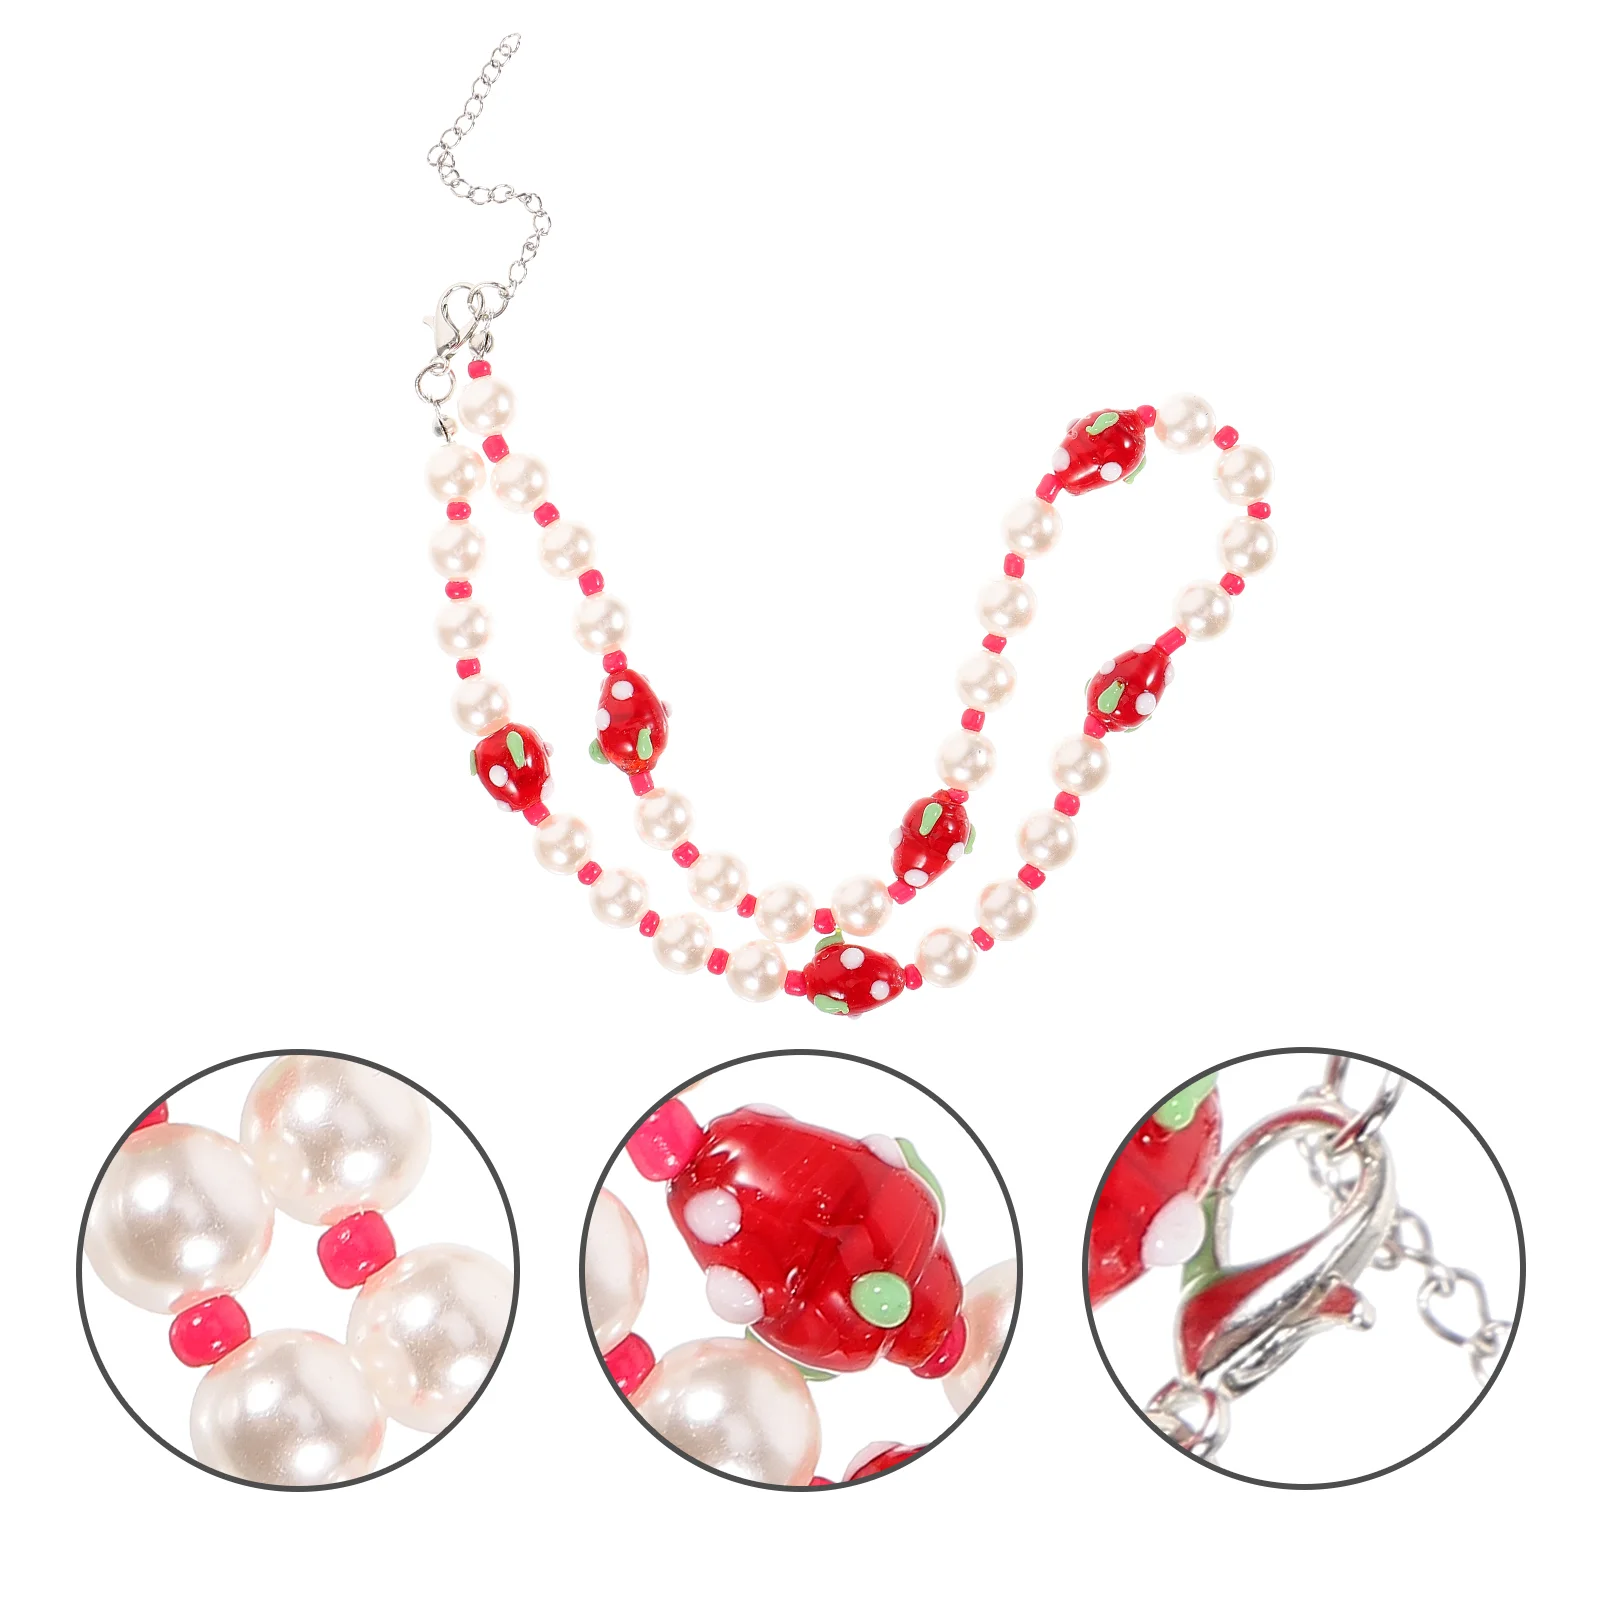 

Strawberry Statement Necklace Women Trendy Clavicle Chain Choker Glass Jewelry Girl Miss Pearl